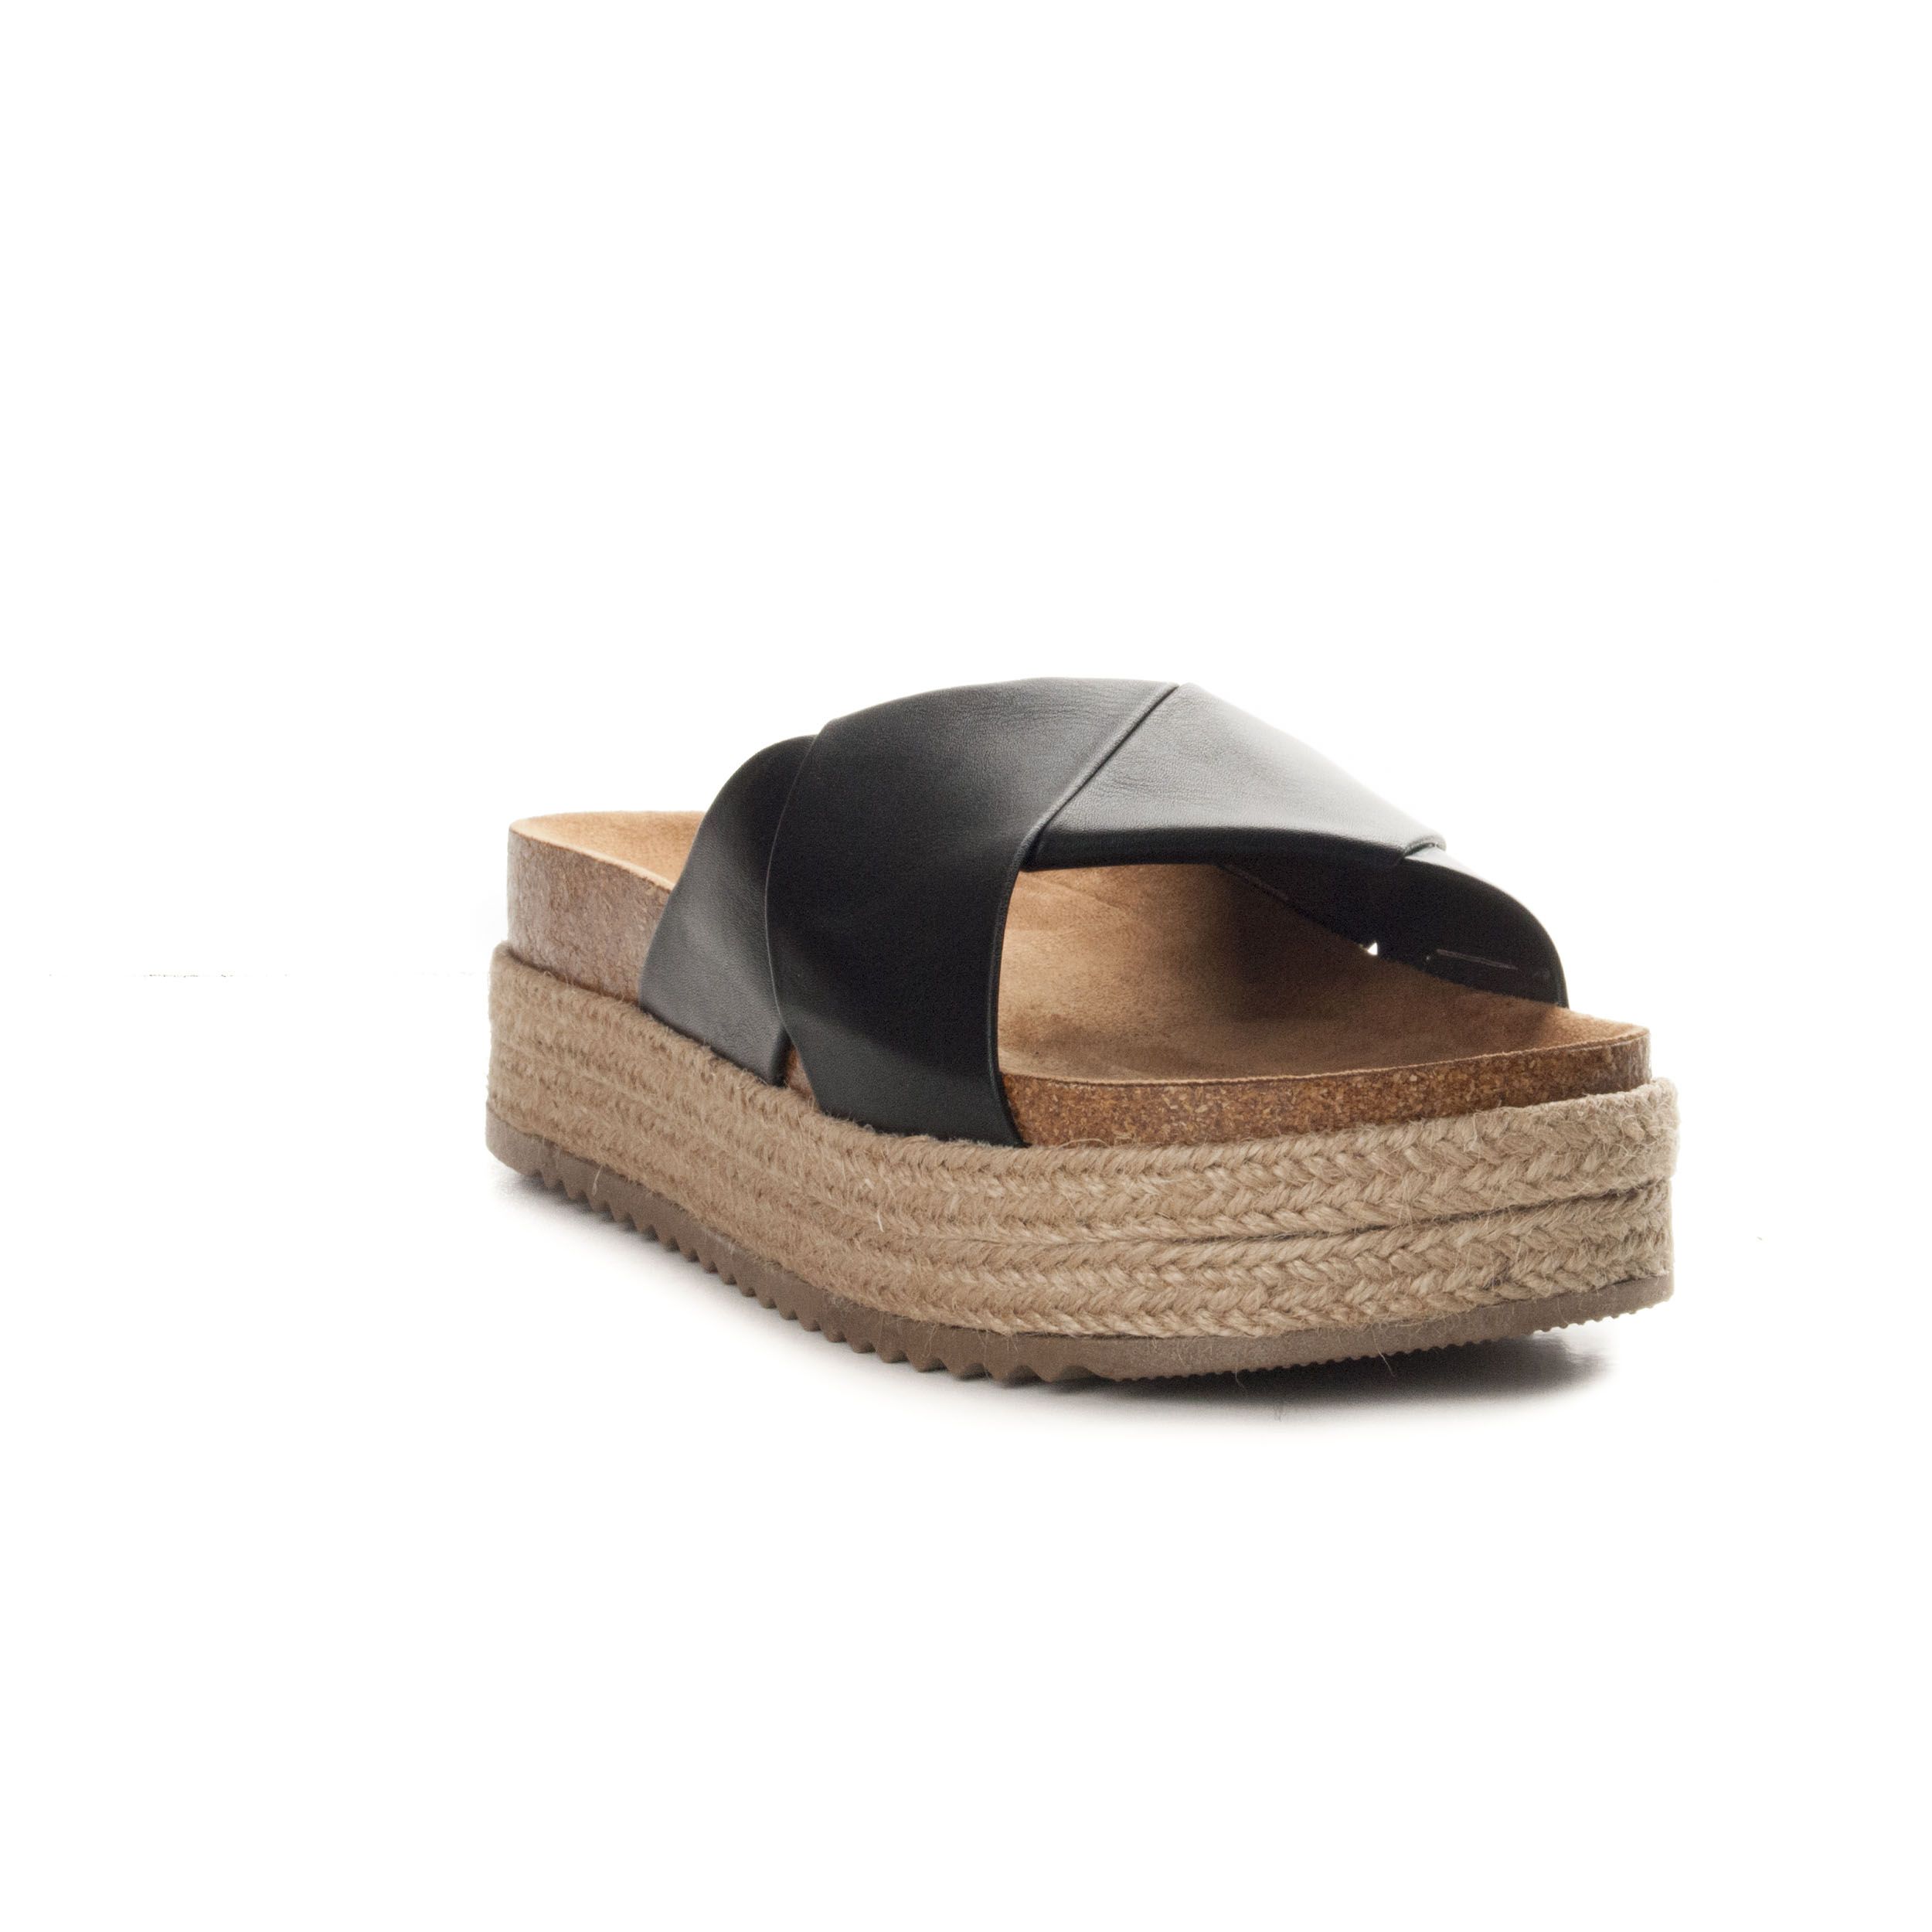 Sandal of esparto with soft suede plant, ideal for summer for its style and comfort. It consists of a platform, with the ideal height, for the day to day. With crossed strips simil skin. Trend this summer. Sandal that can not miss this summer in your closet.